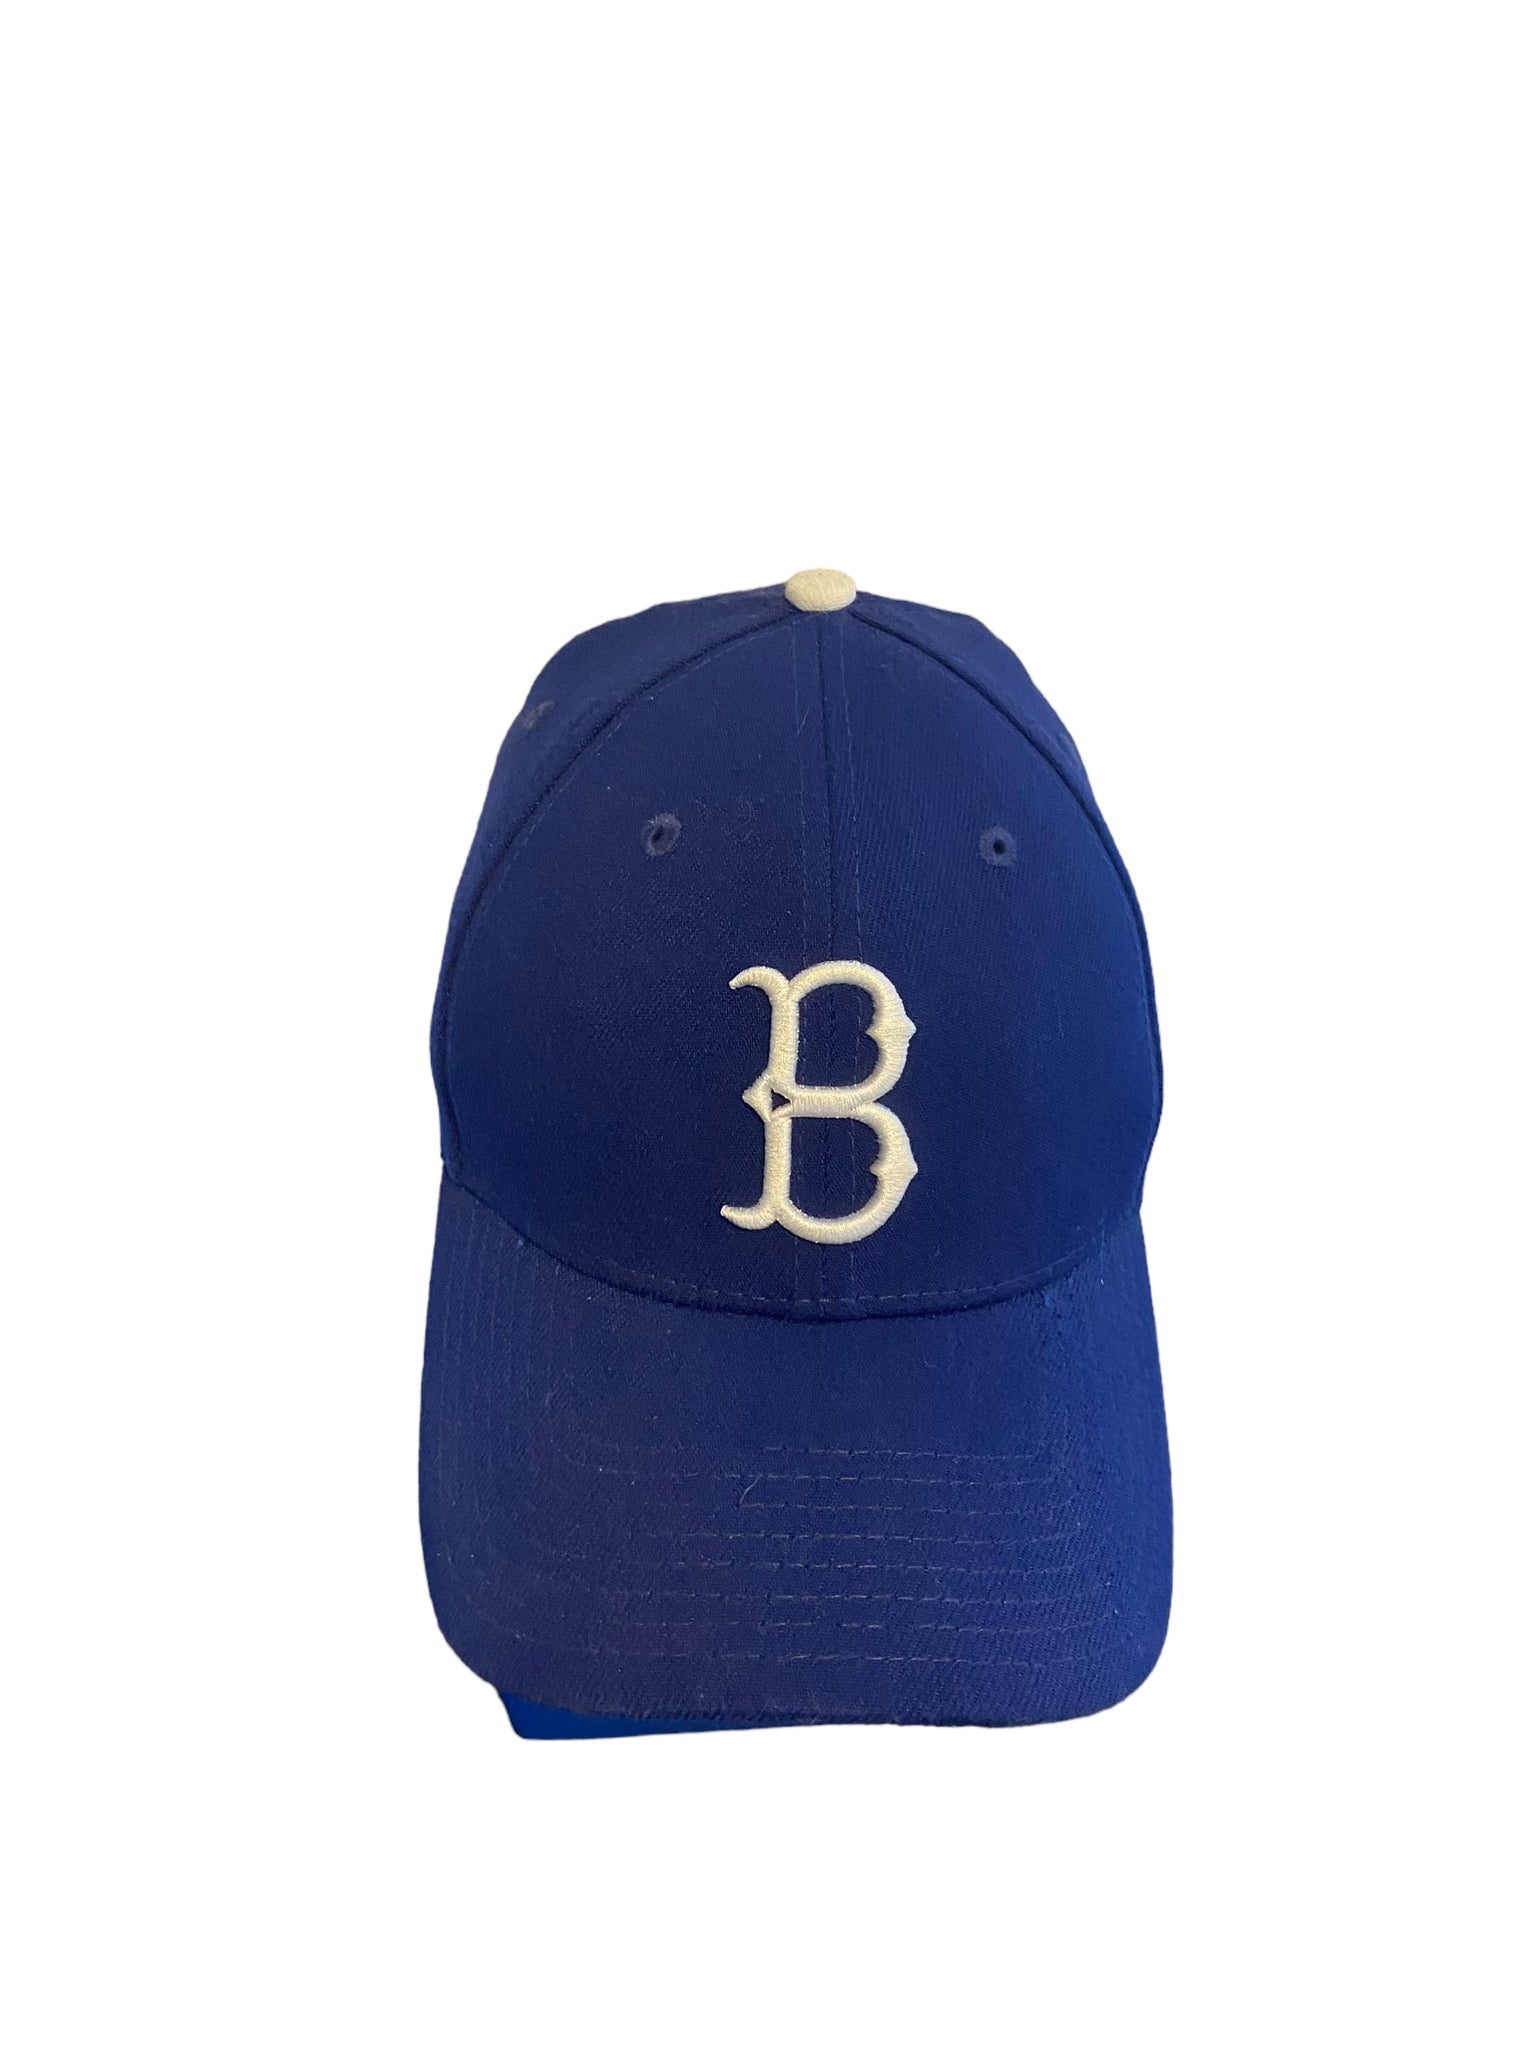 American Needle Cooperstown Collection MLB LA Dodgers Blue W/Whte  StripeFlat Hat, Men's Fashion, Watches & Accessories, Cap & Hats on  Carousell